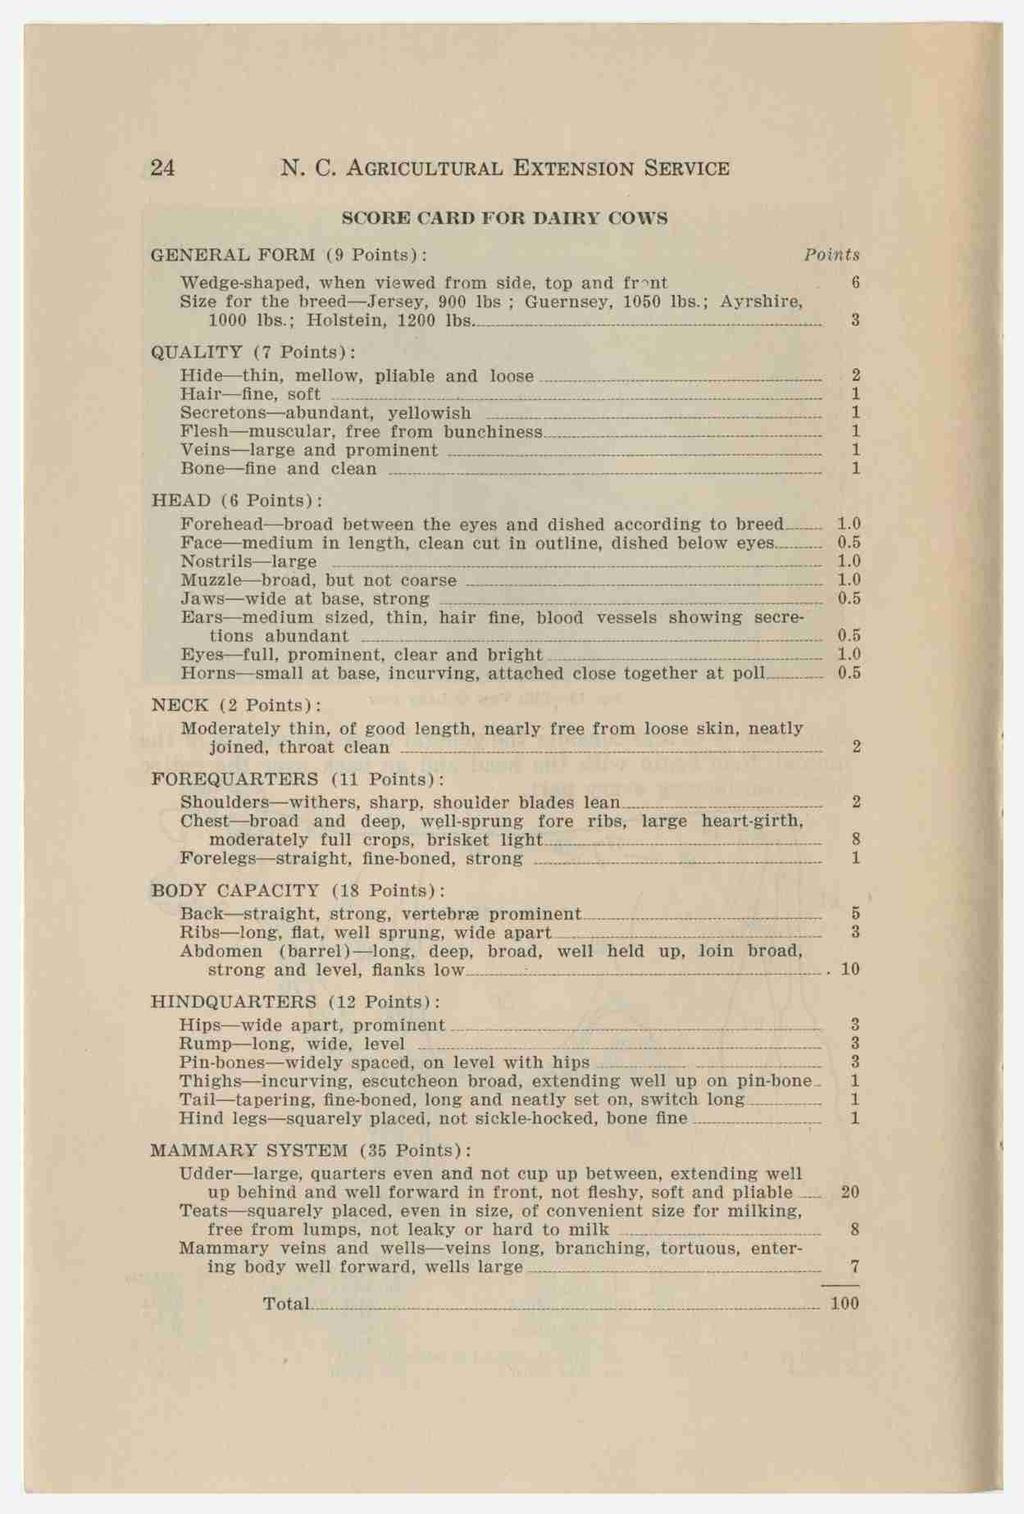 24 N. C. AGRICULTURAL EXTENSION SERVICE SCORE CARD FOR DAIRY COW S GENERAL FORM (9 Points): Points Wedge-shaped, when viewed from side, top and frent 1.